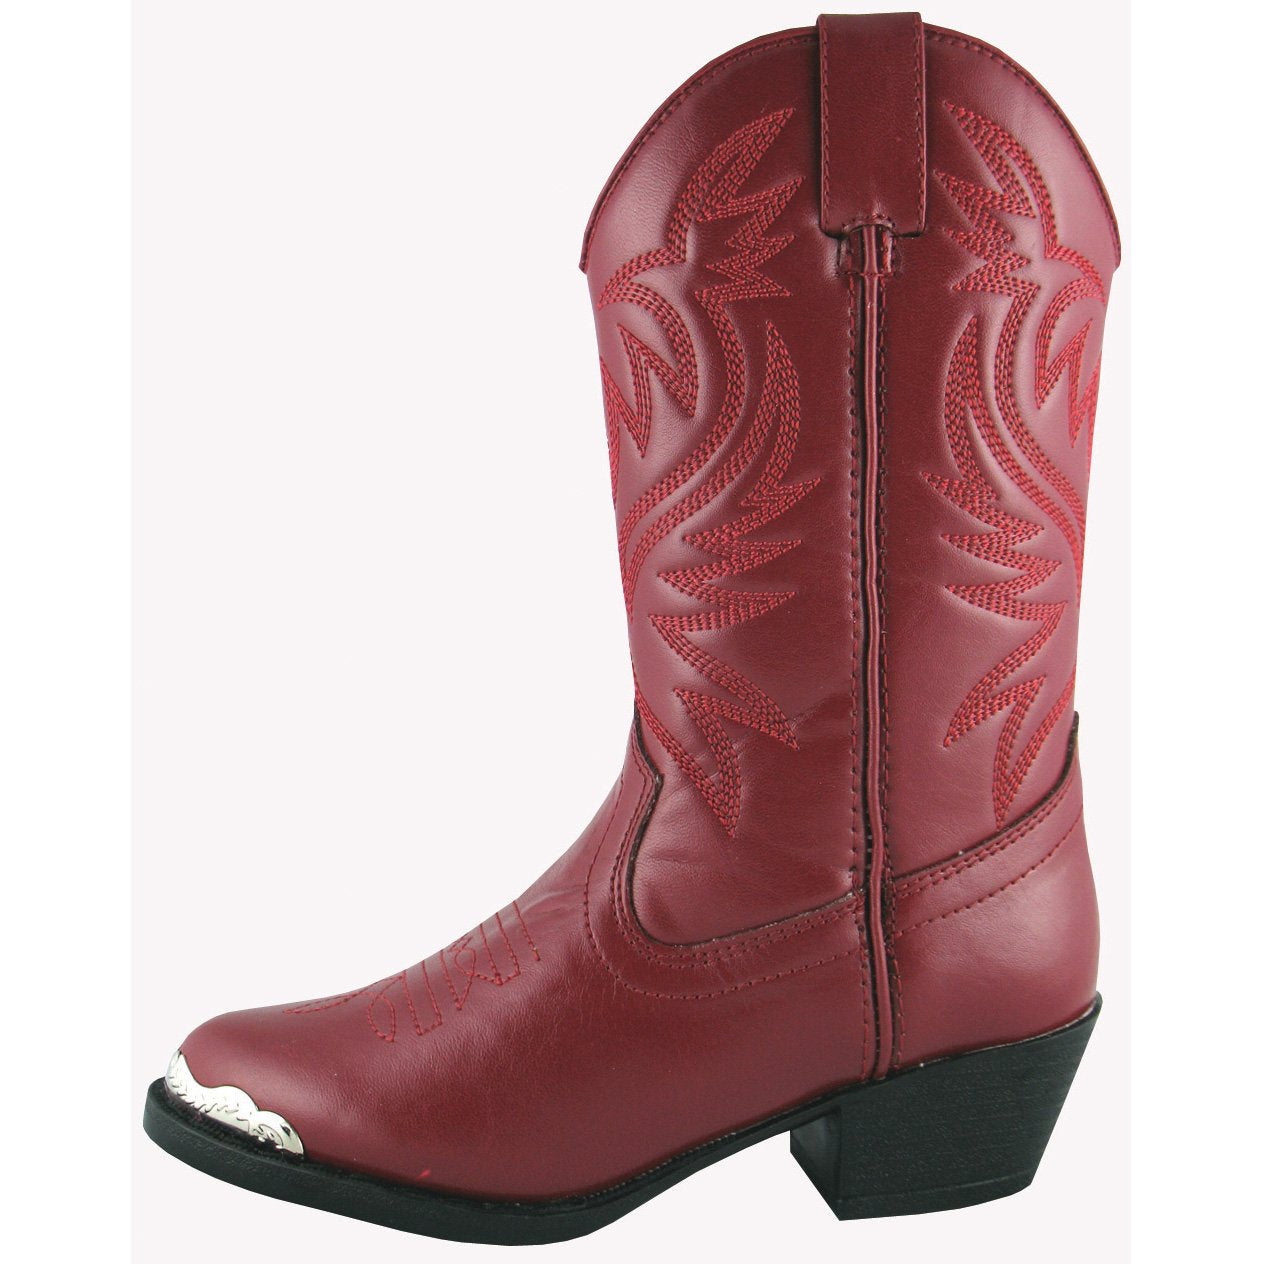 Smoky Mountain Children's Red Western Boot